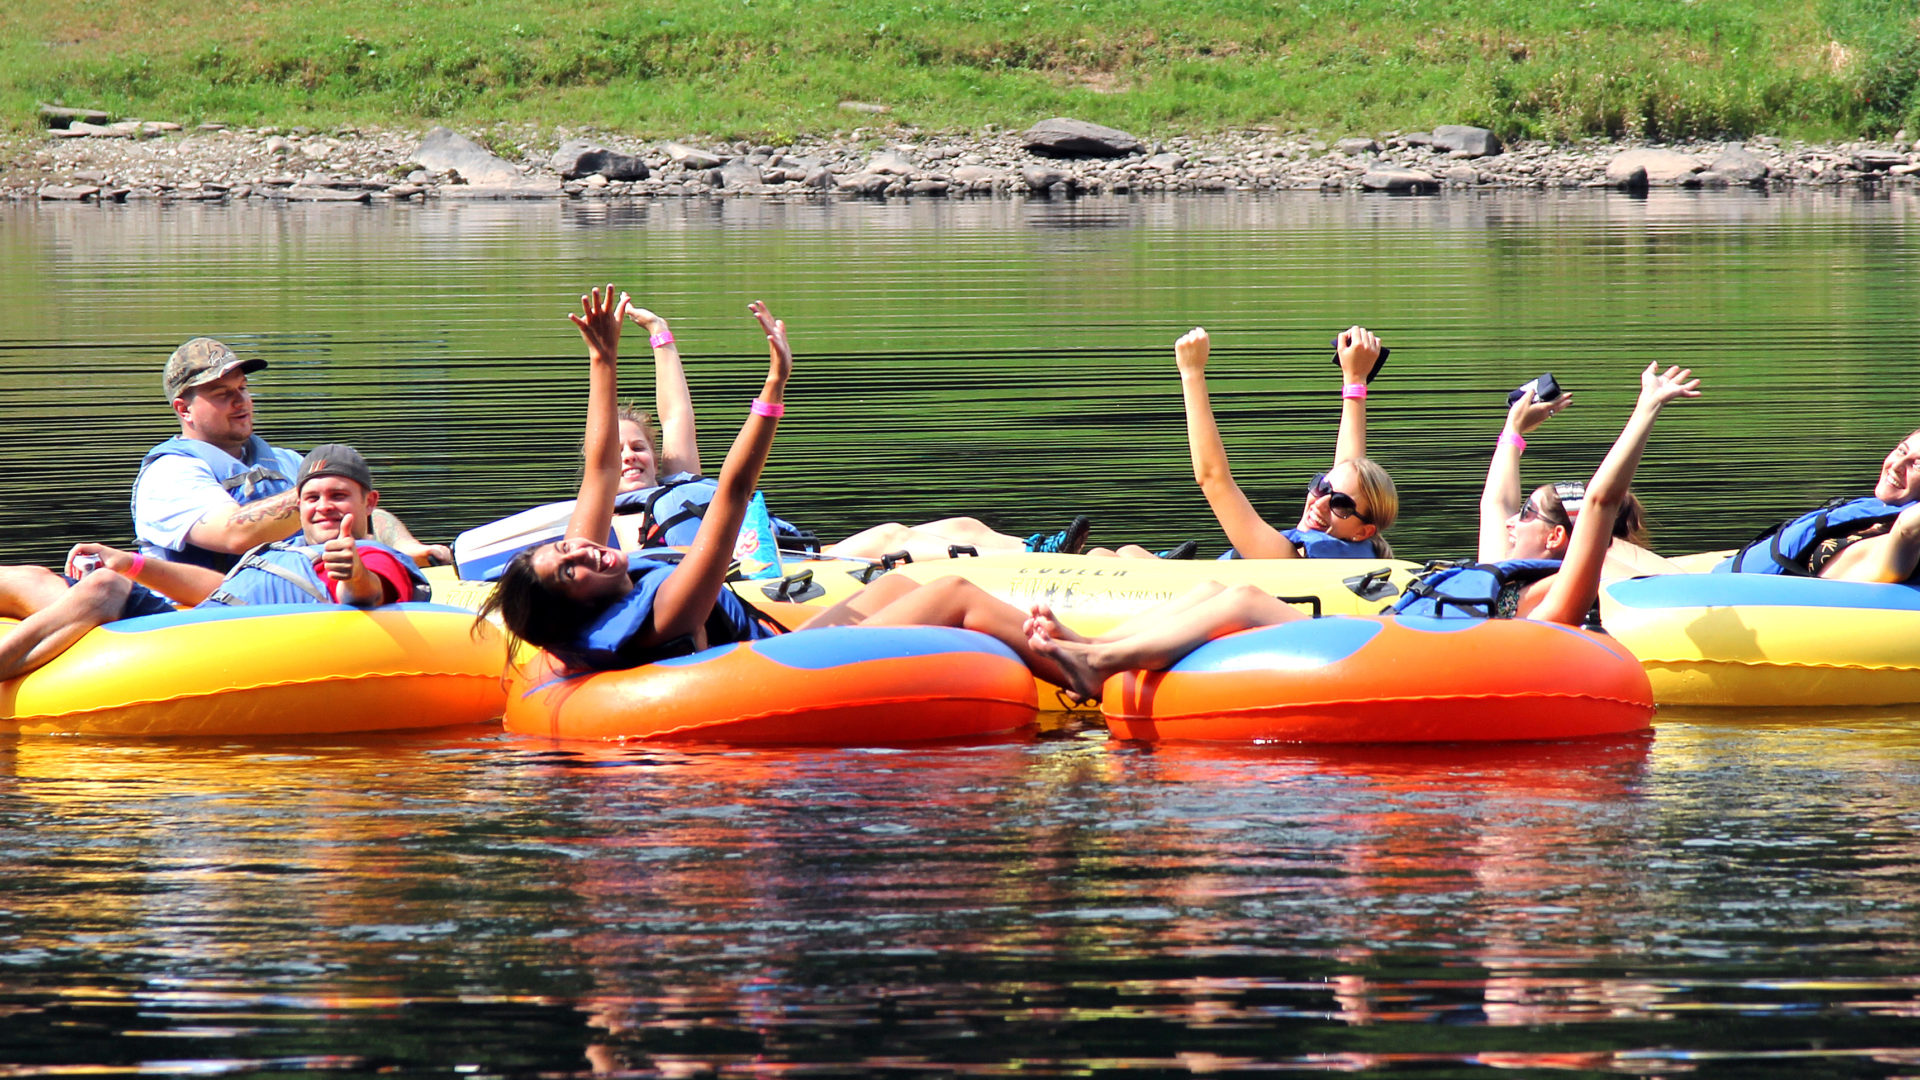 group of tubers enjoying the day Knights Eddy Indian Head Canoeing Rafting Kayaking Tubing Delaware River